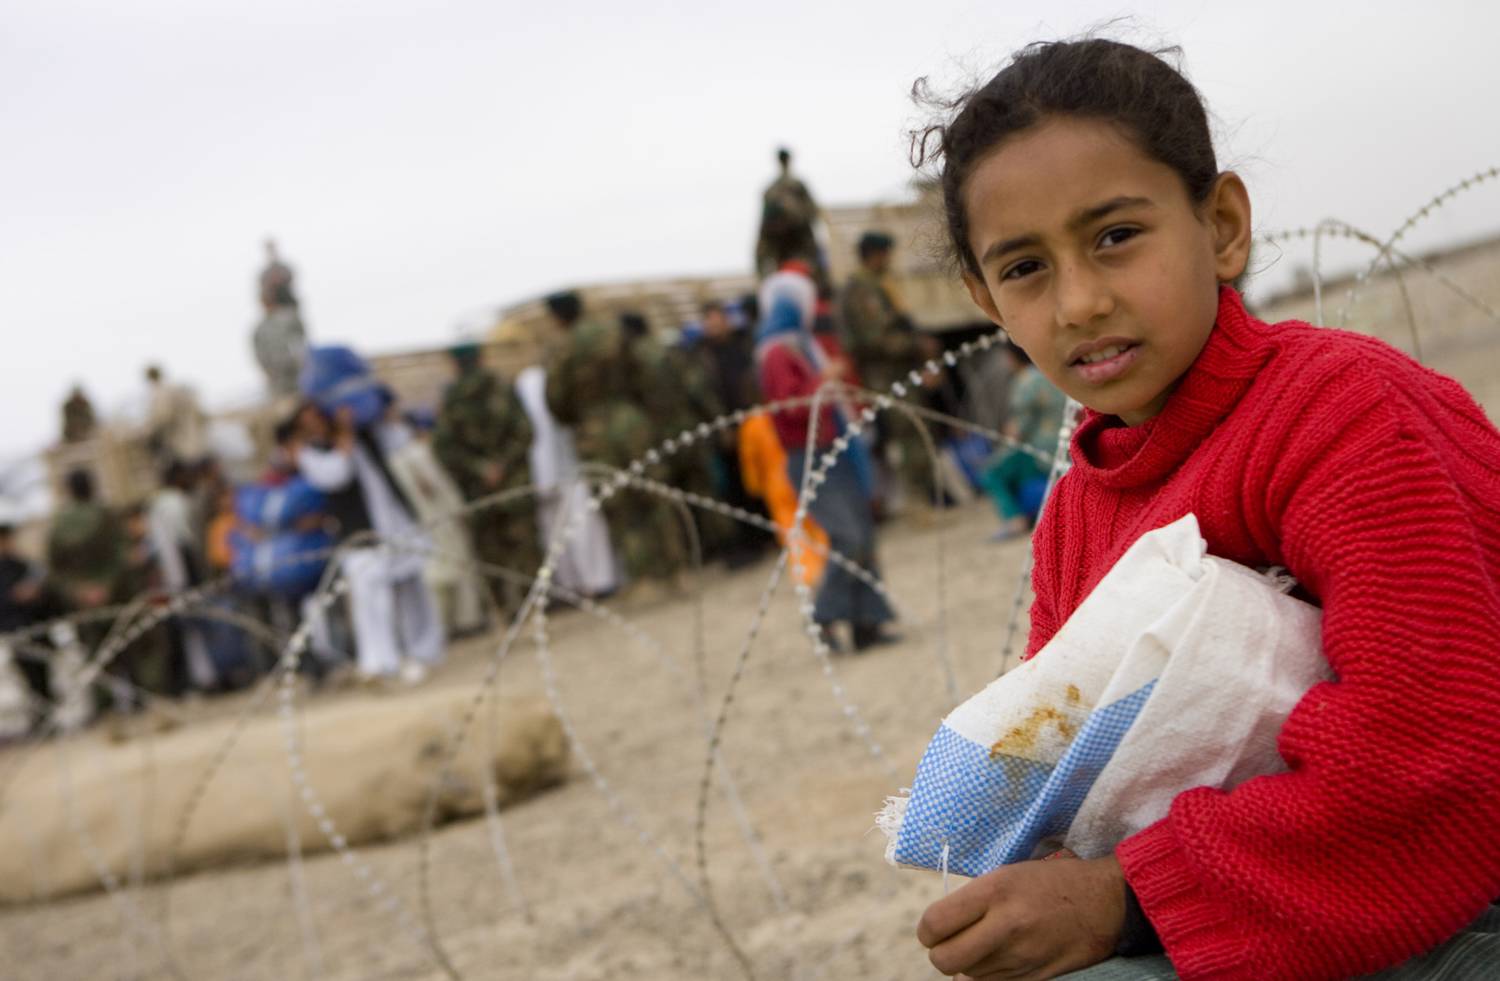 KANDAHAR, Afhanistan -- A young girl is watching over the distribution while she guards her own supplies until somebody comes to help her move it. Photo: Sgt Chris Halton RLC, British Army via Flickr